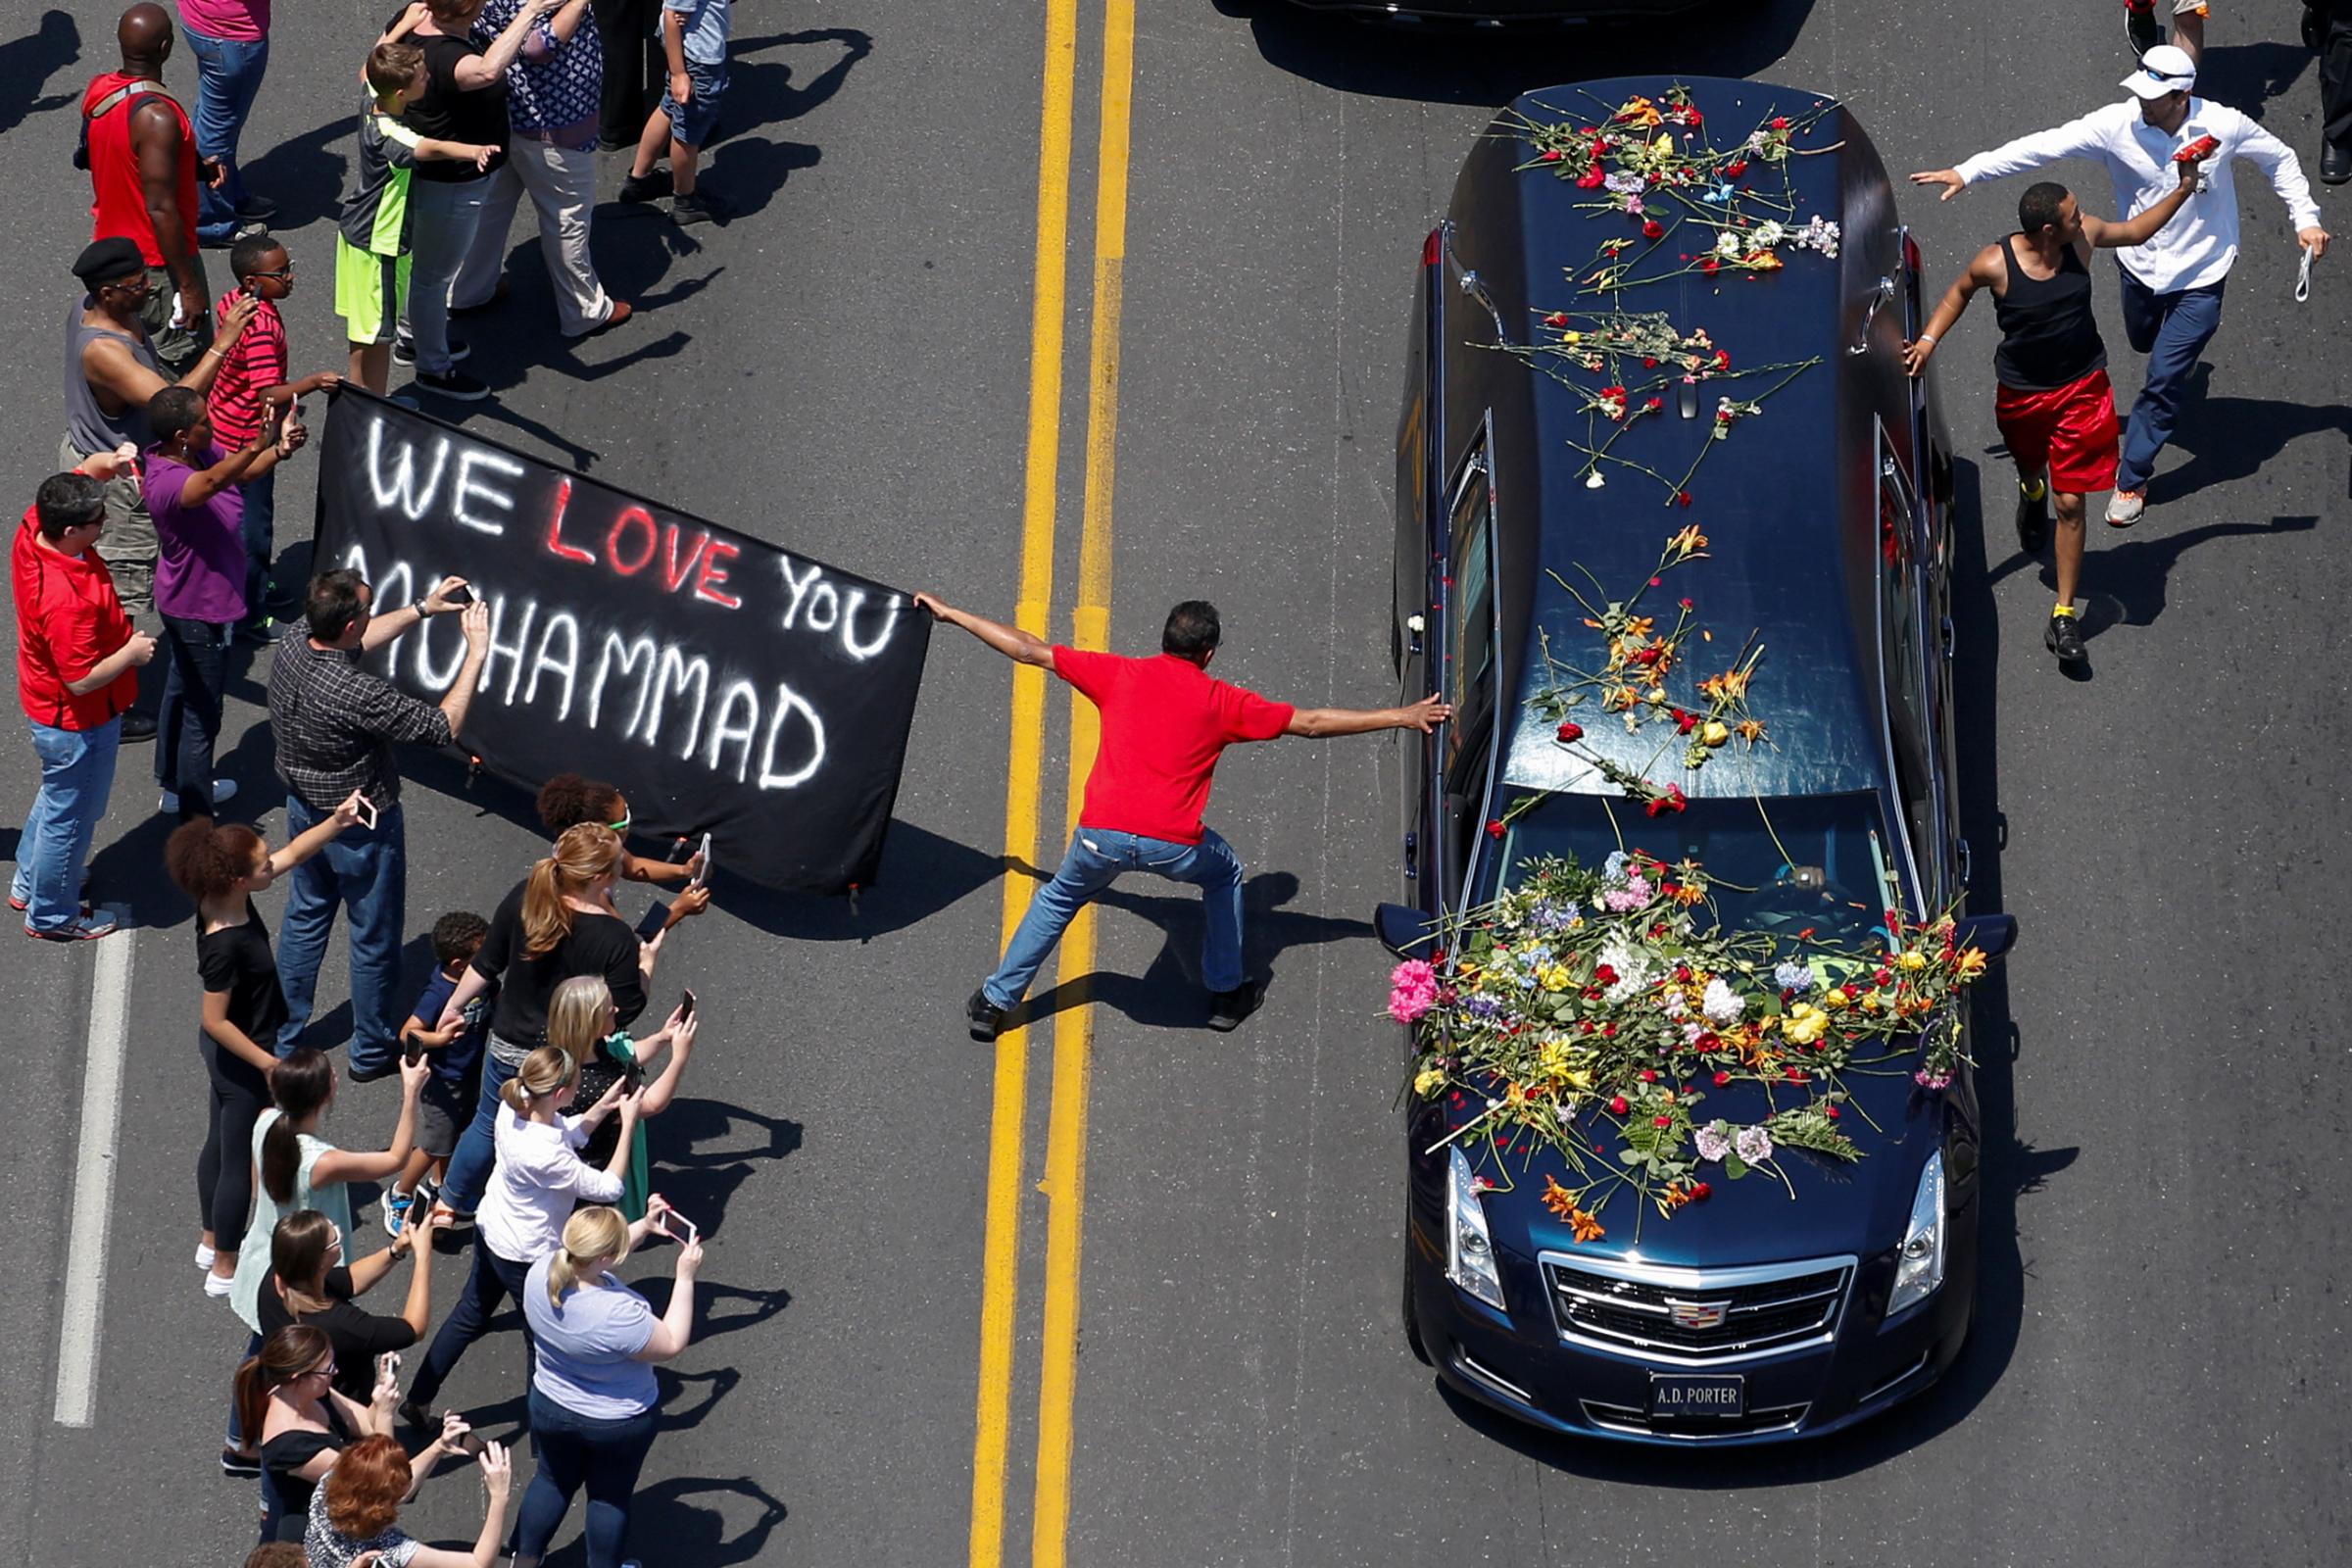 A banner stating "We Love You Muhammad" is displayed as well-wishers touch the hearse carrying the body of the late boxing champion Muhammad Ali during his funeral procession through Louisville, Kentucky, June 10, 2016.